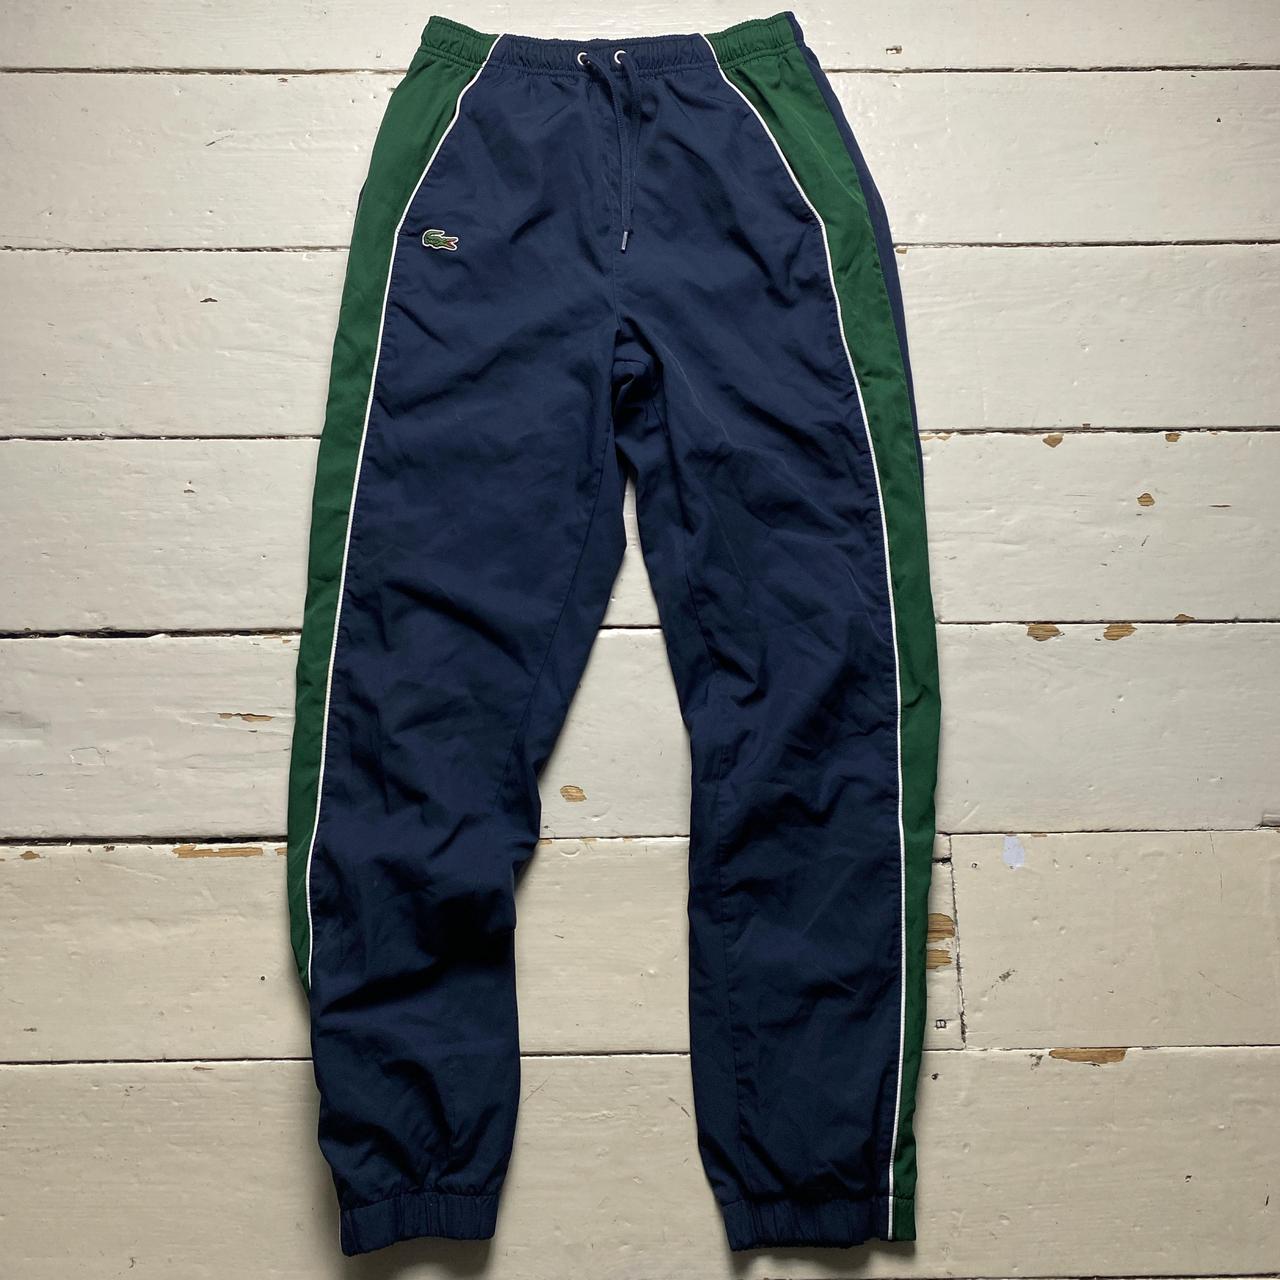 Lacoste Navy Green and White Trackpant Shell Bottoms